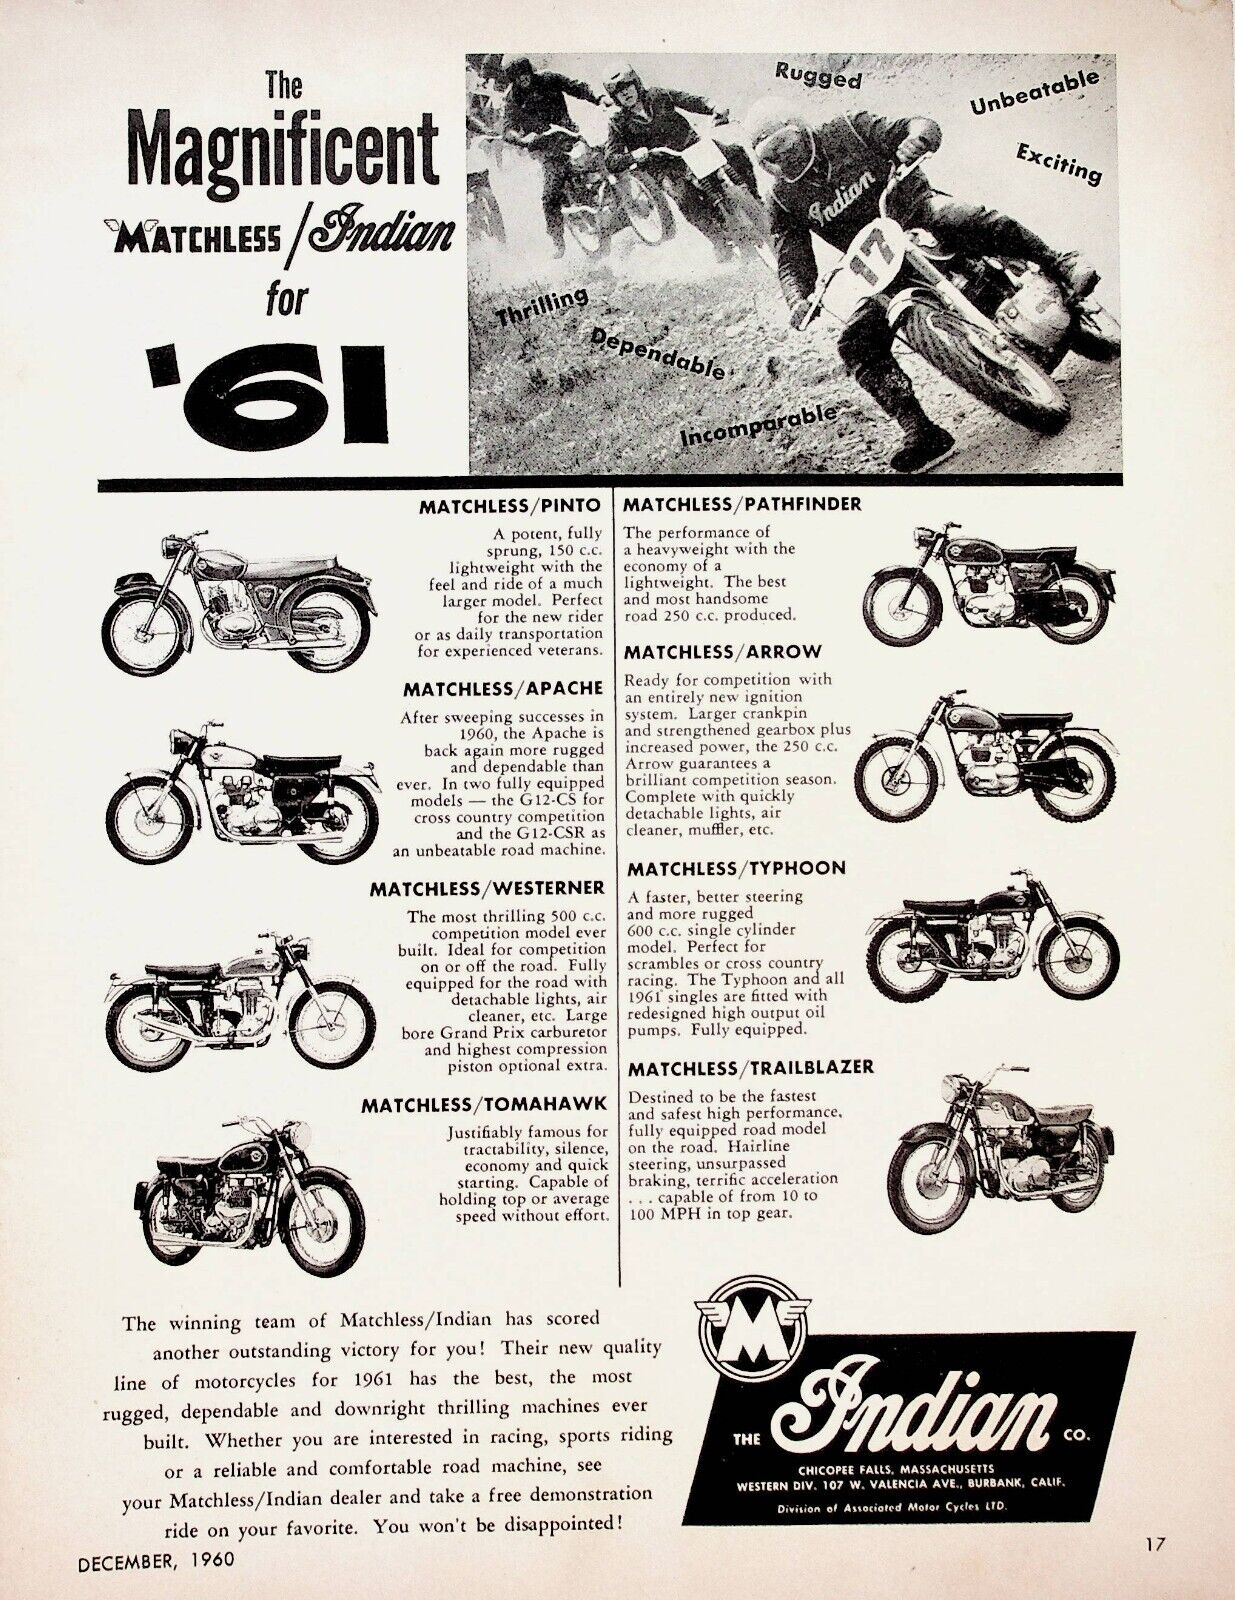 1961 Matchless Indian Motorcycles - Vintage Motorcycle Ad